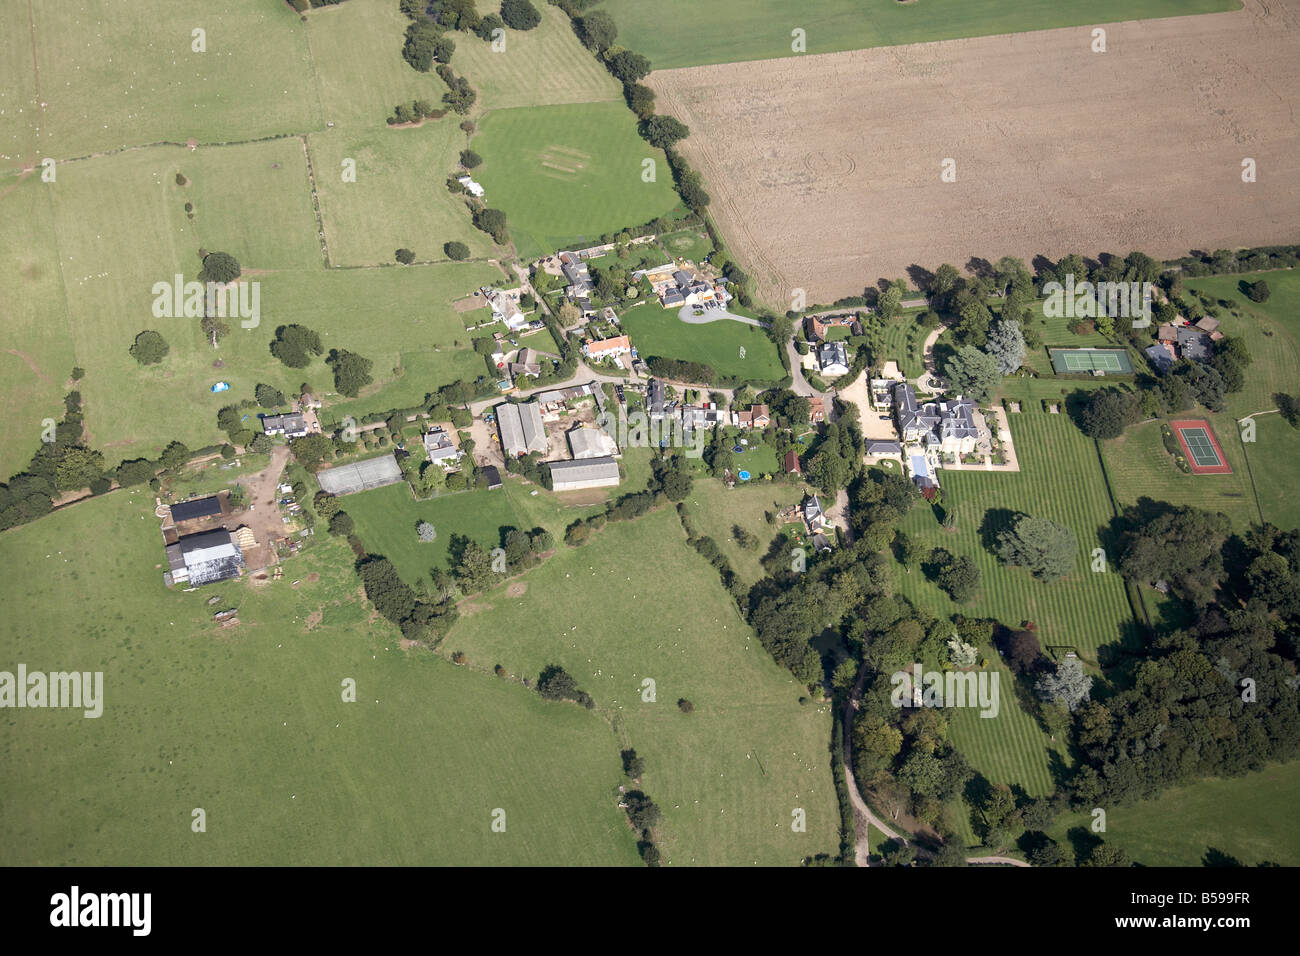 Aerial view north east of country houses farms tennis courts fields trees Little Munden Hertfordshire England UK High level obli Stock Photo